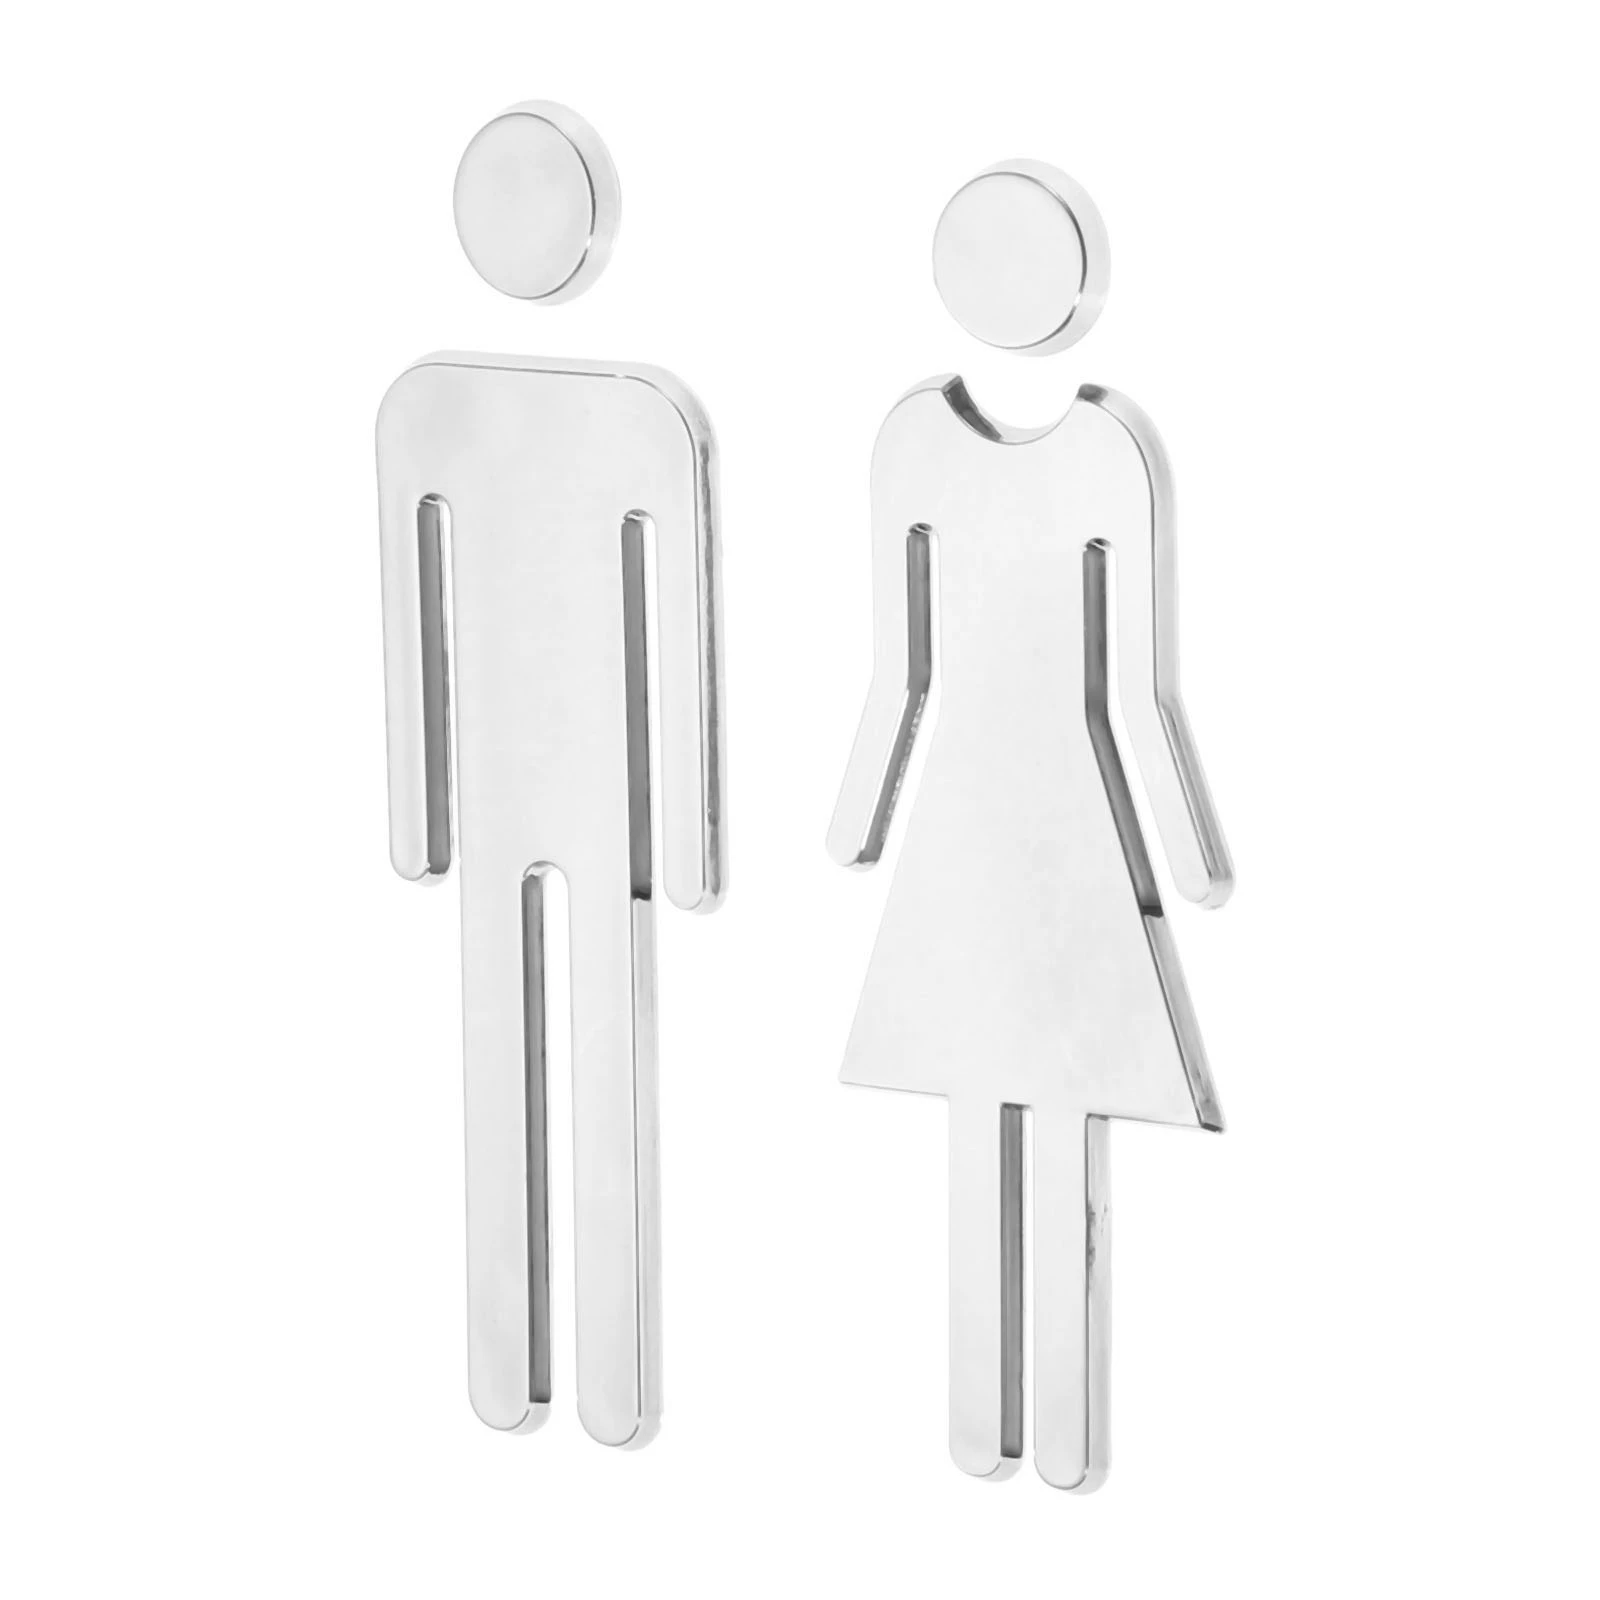 Toilet Stickers Removable 3D Mirror Sticker For Door Decal Wall Office Mall/2PCS